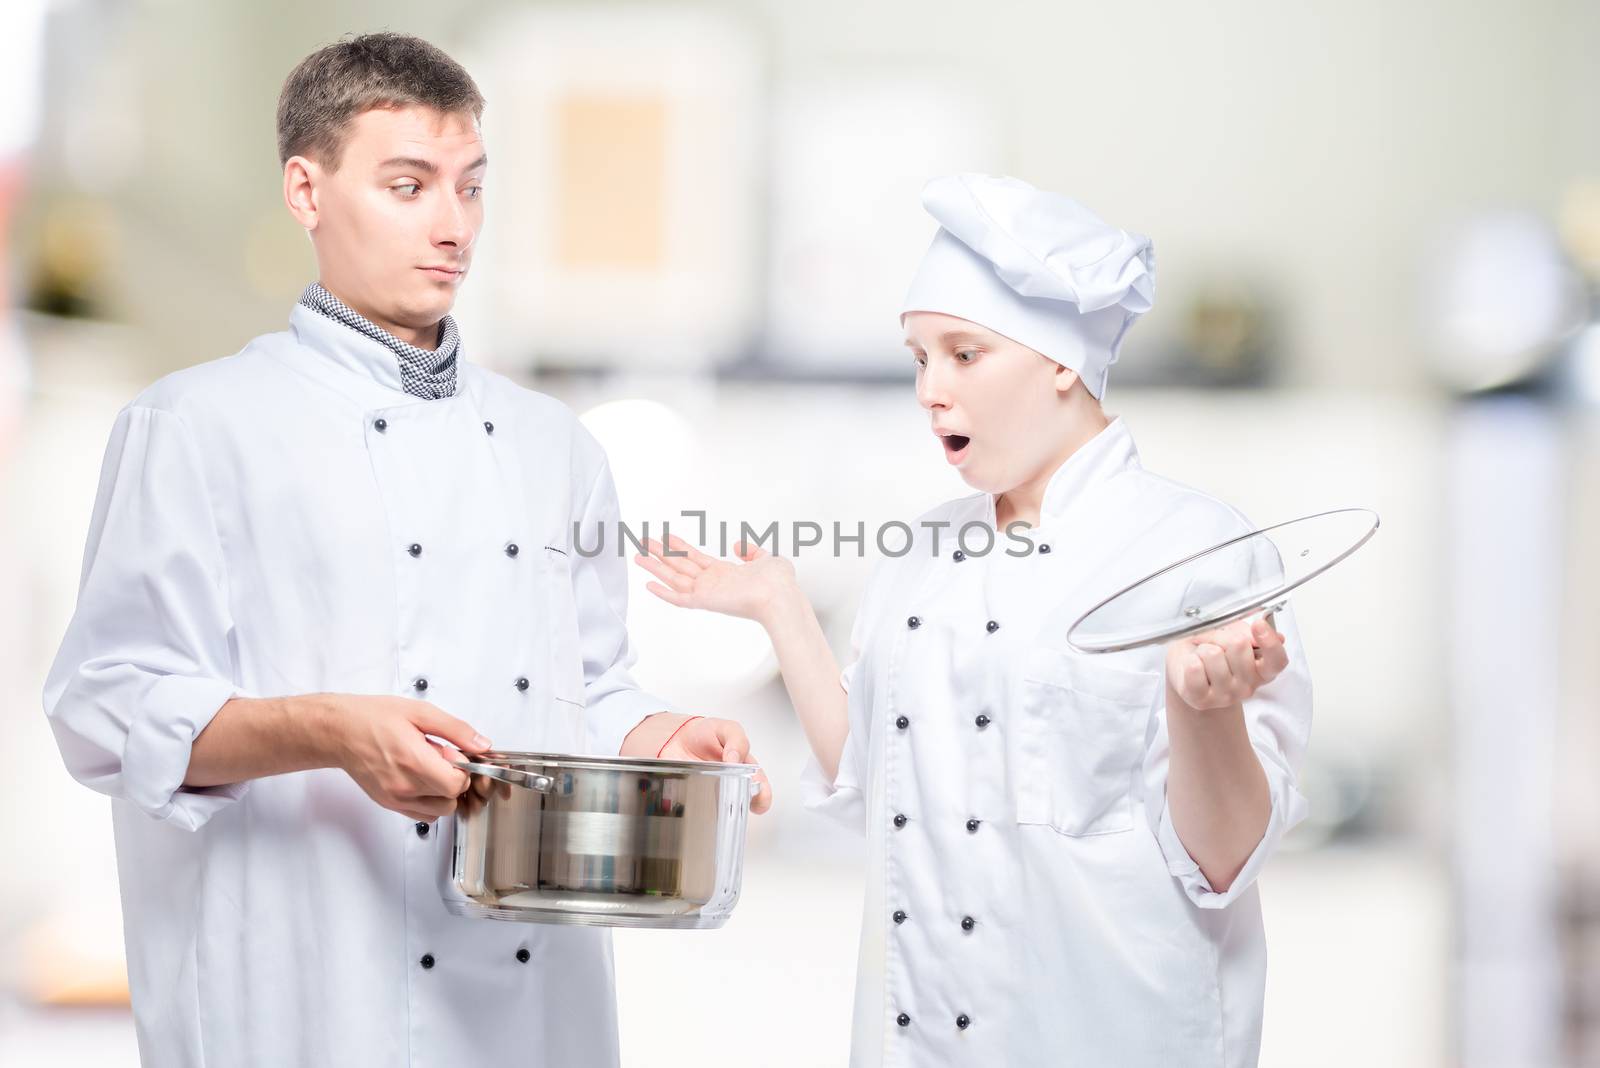 surprised cook looks at soup in a pan of another chef on the bac by kosmsos111